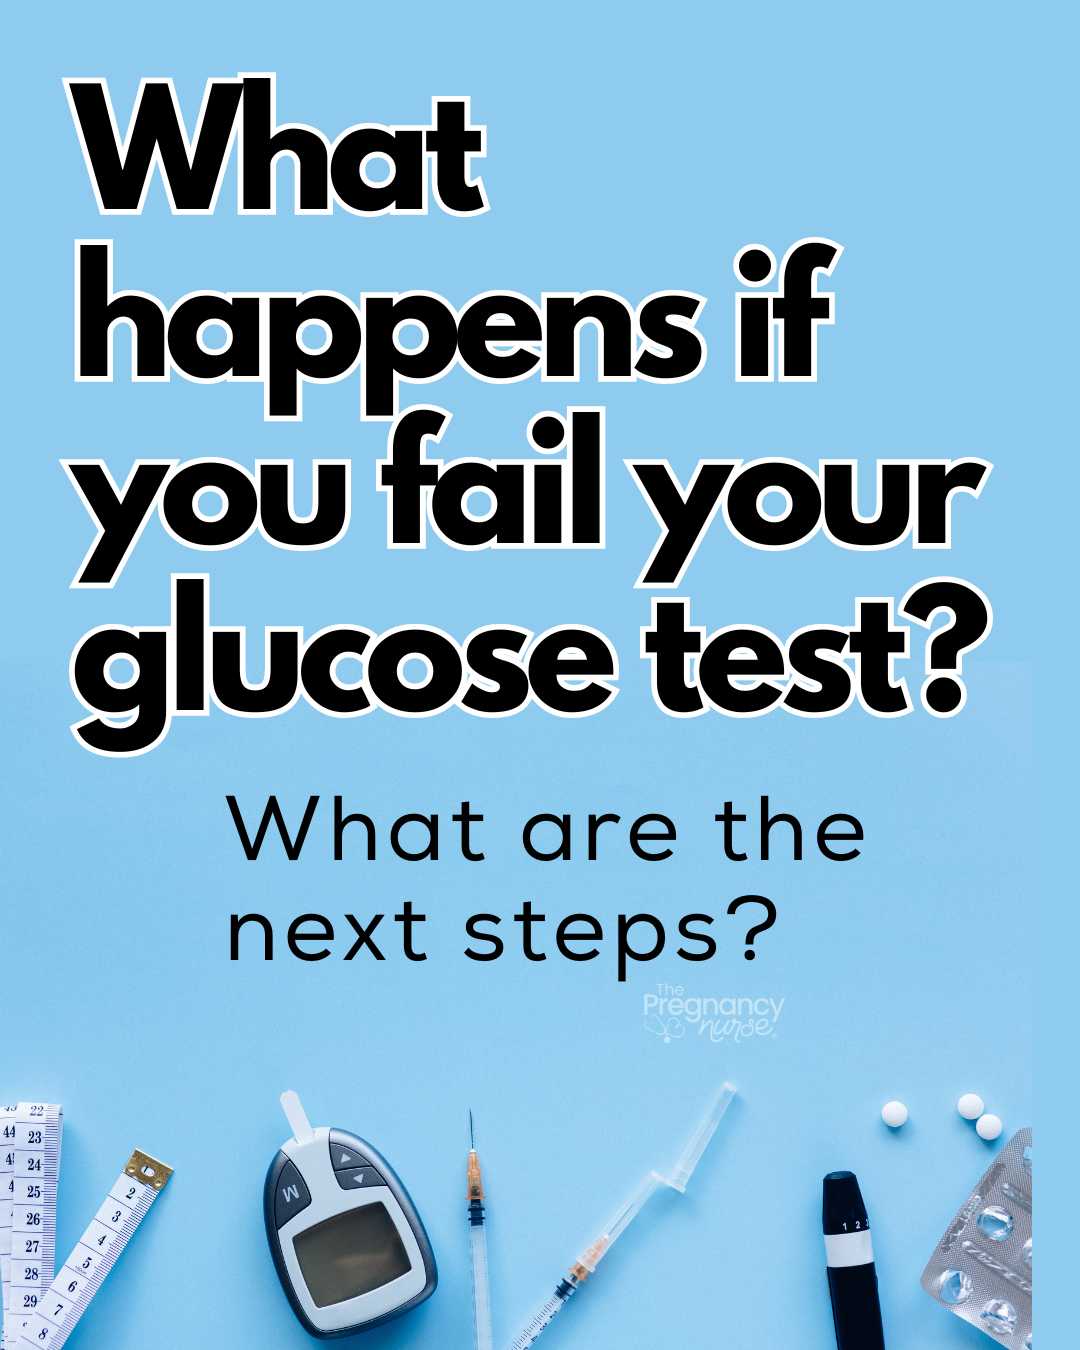 glucose supplies / what heppsn if you fail your glucose test / what are the next steps?